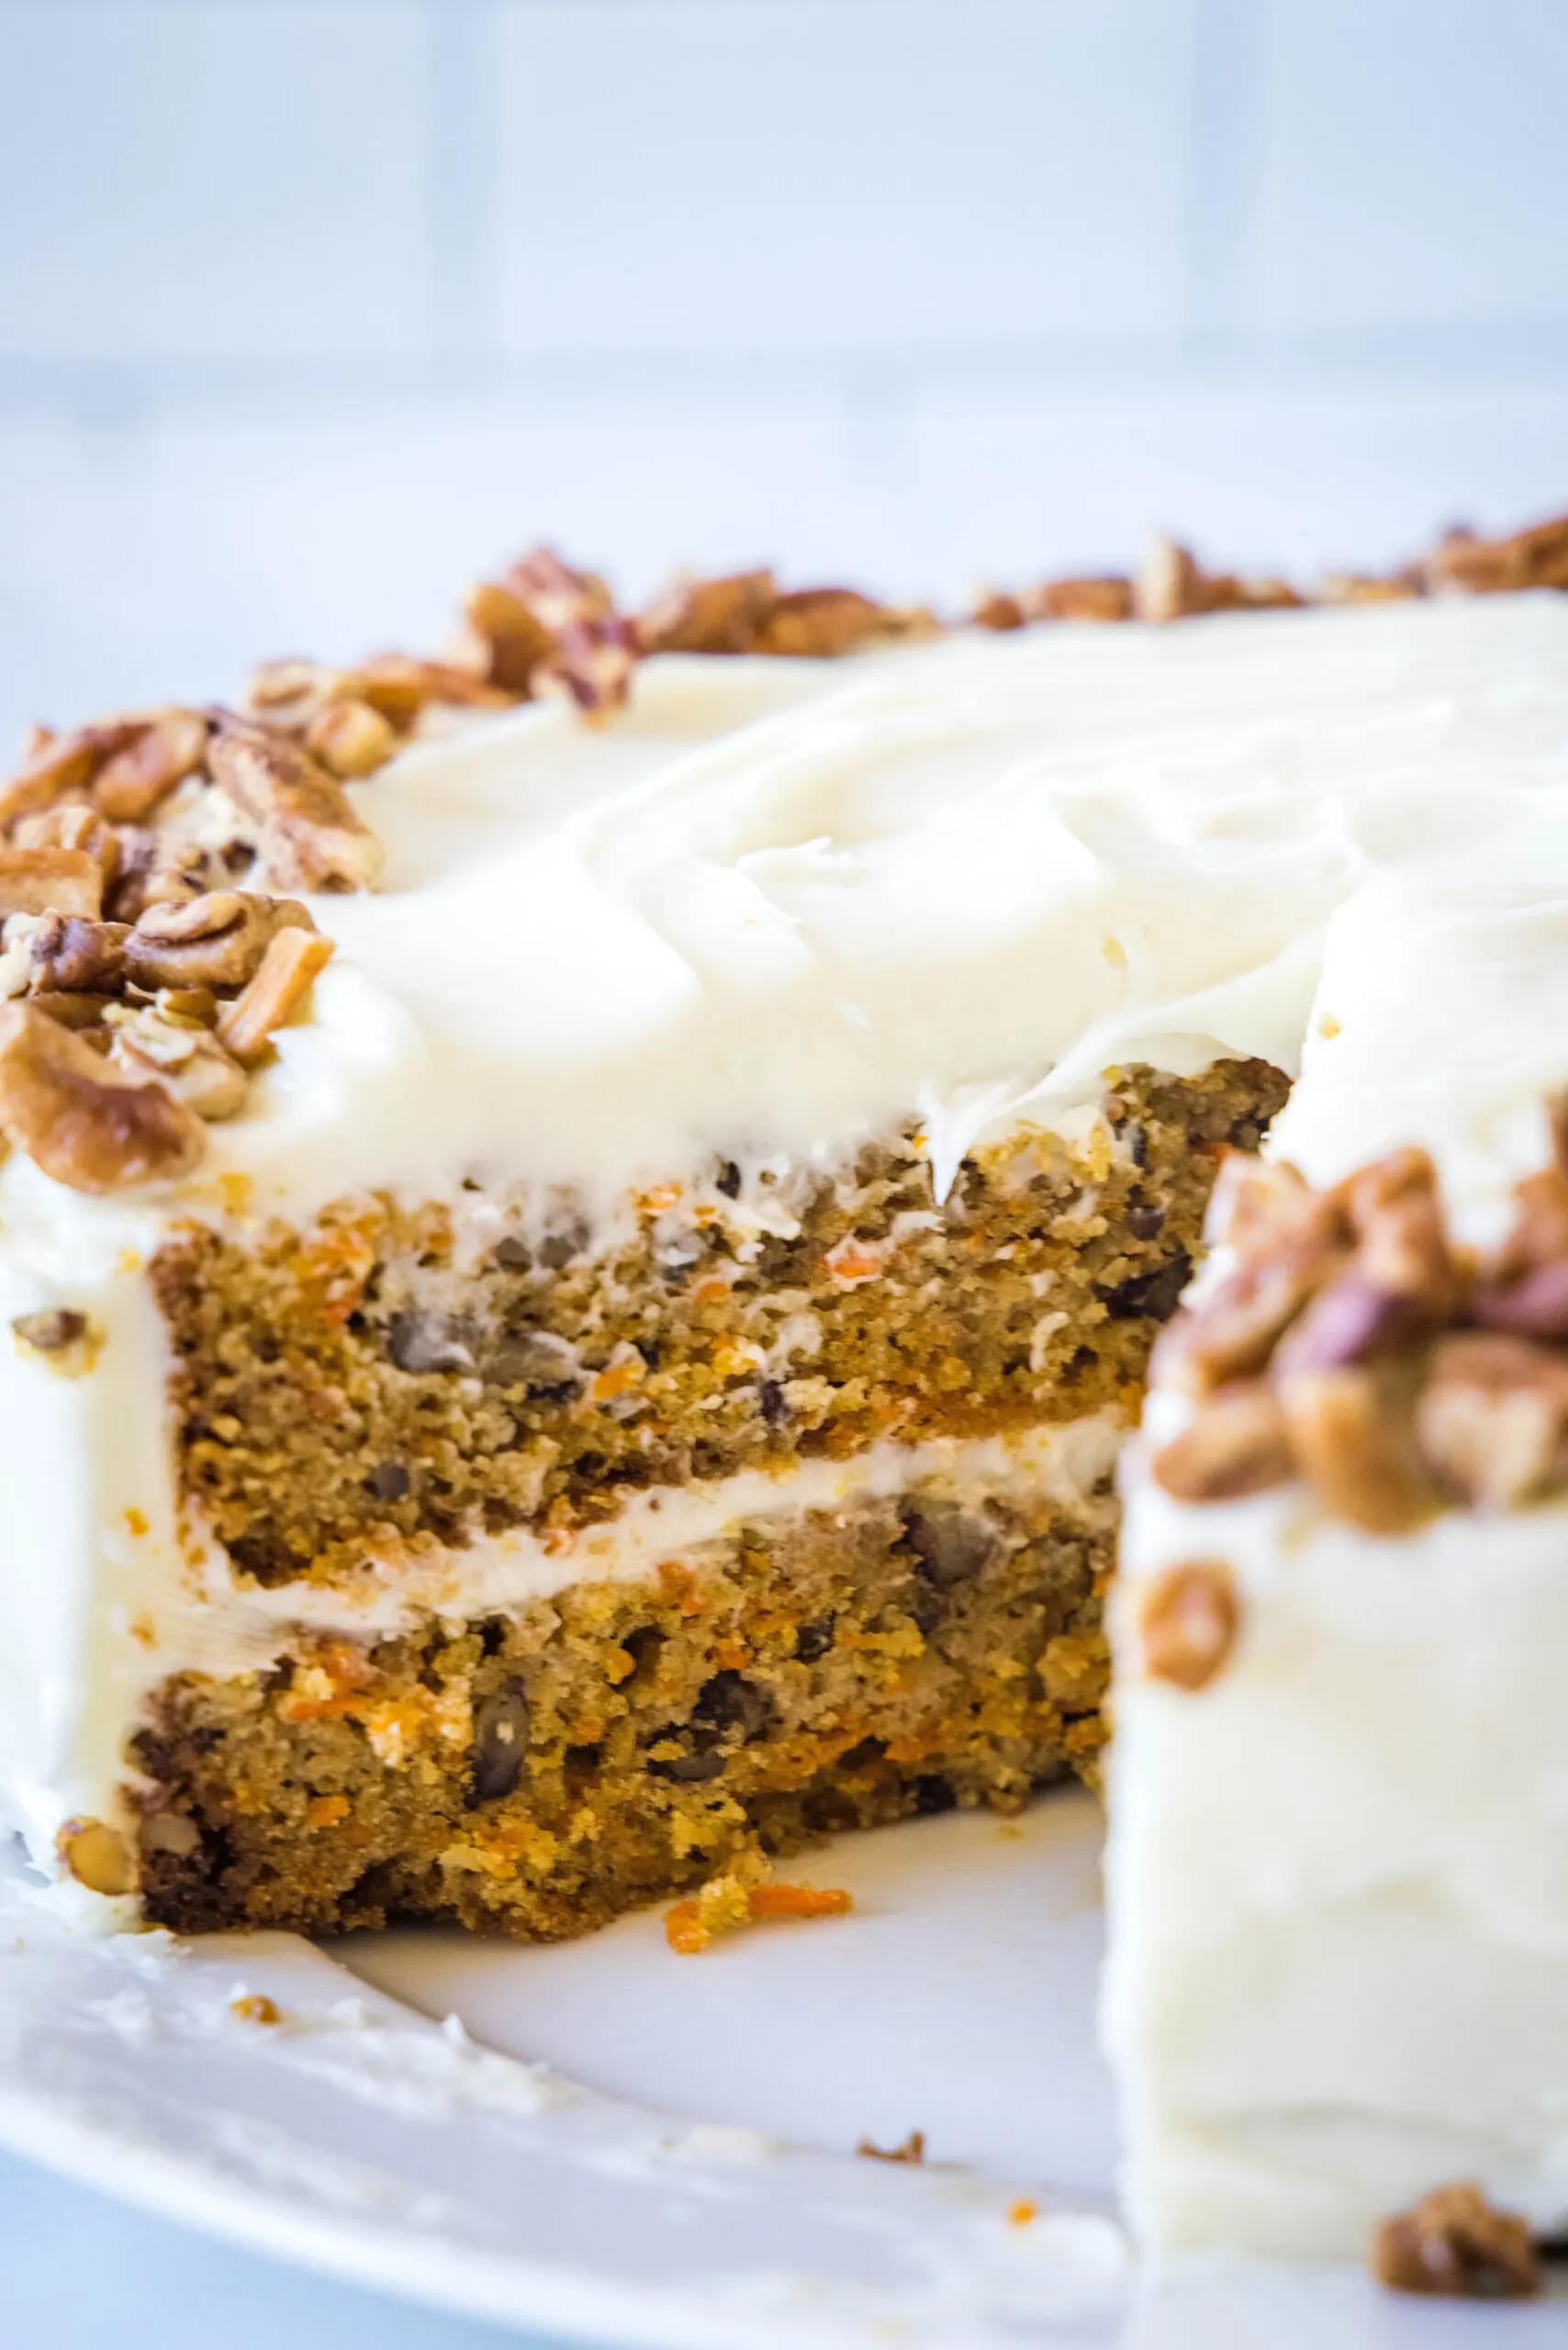 Frosted carrot cake with a slice missing.